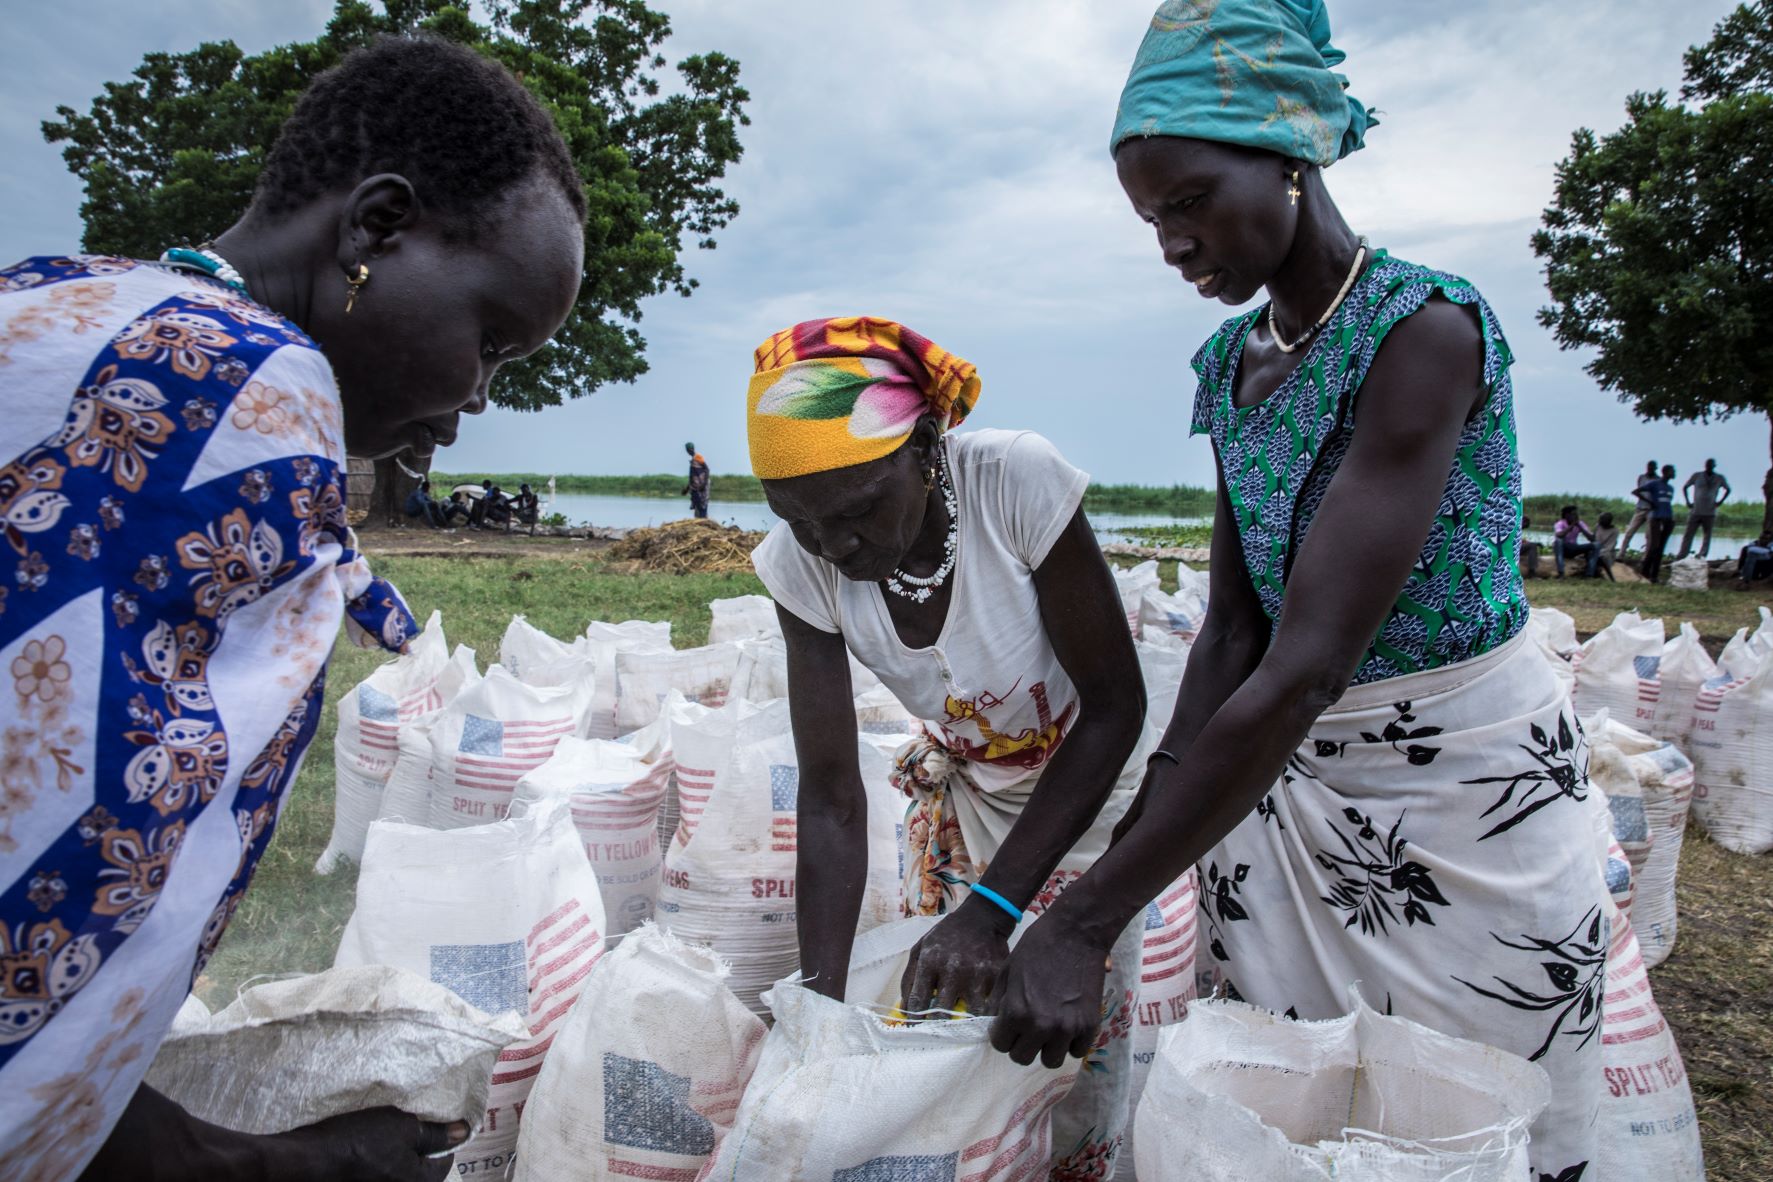 Urgent funding needed to assist 6.8 million in S. Sudan in 2022